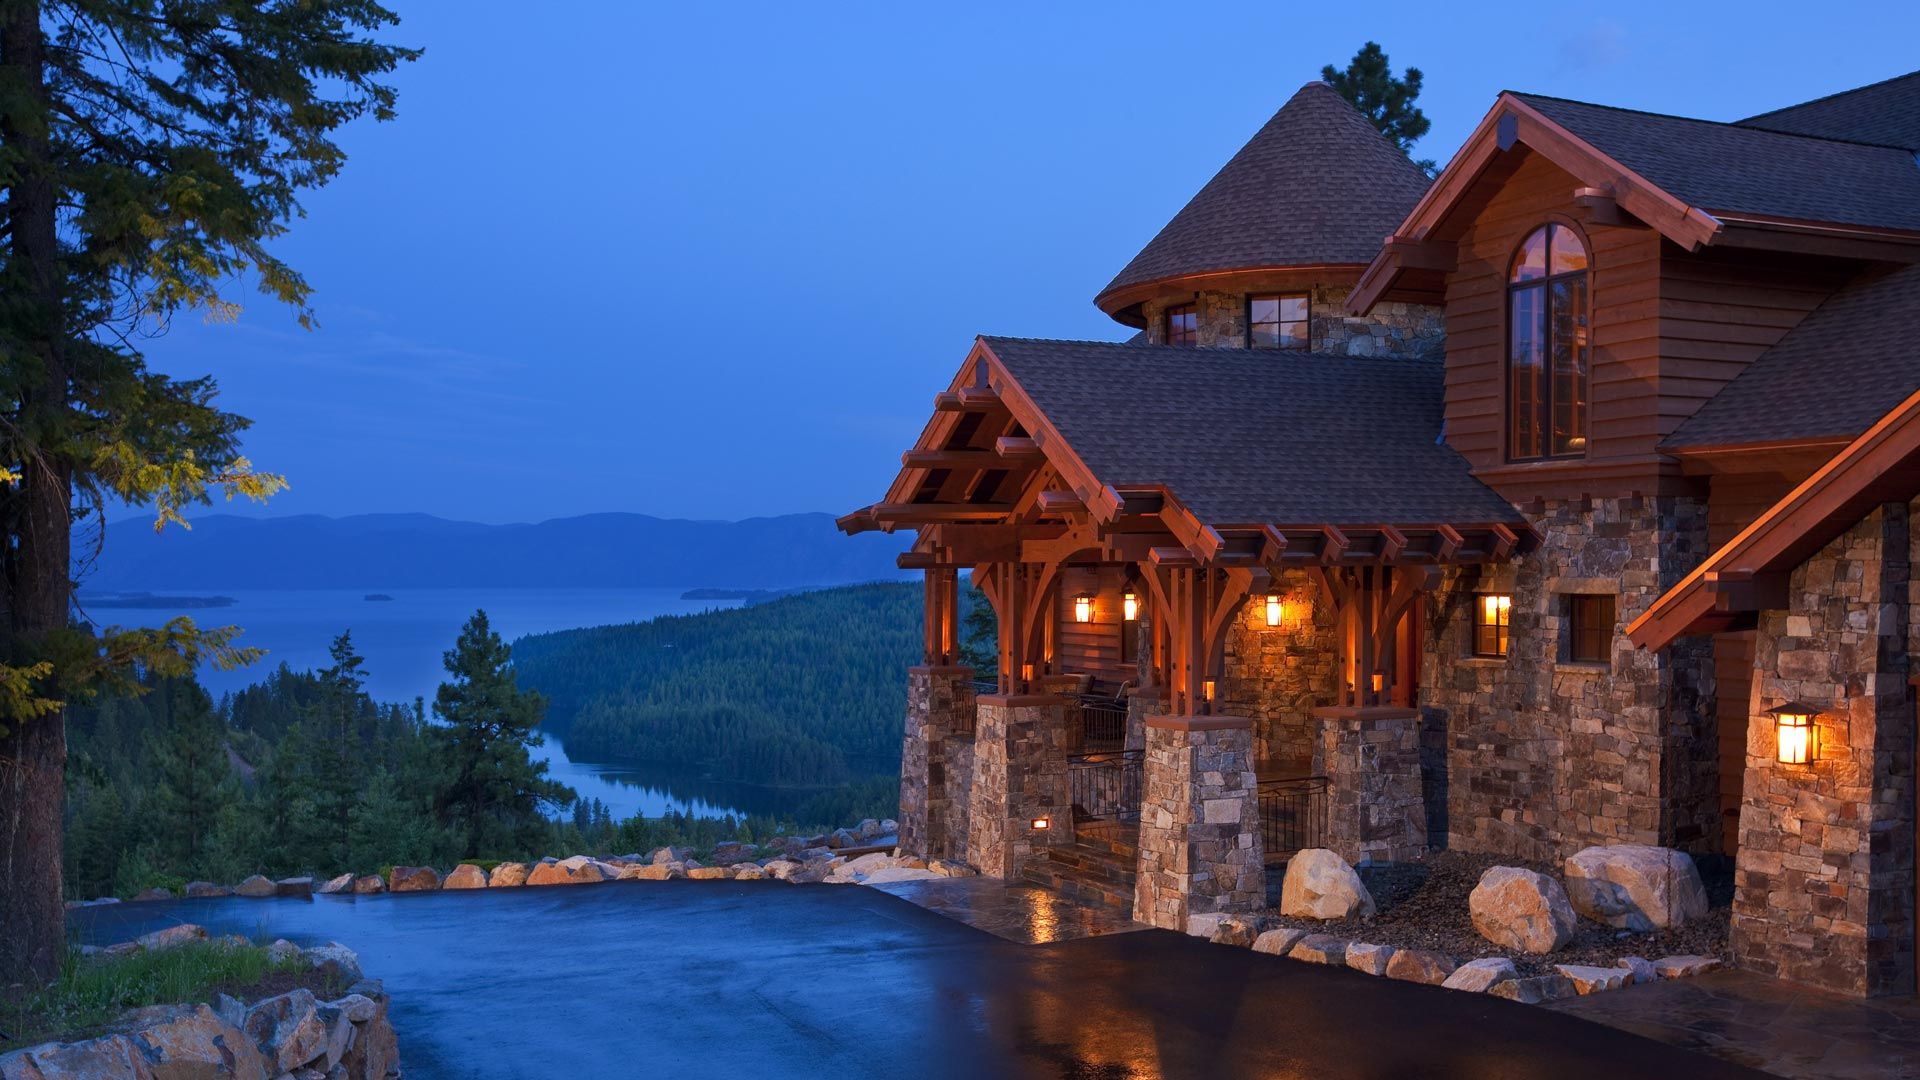 House Overlooking the Lake HD Wallpaper